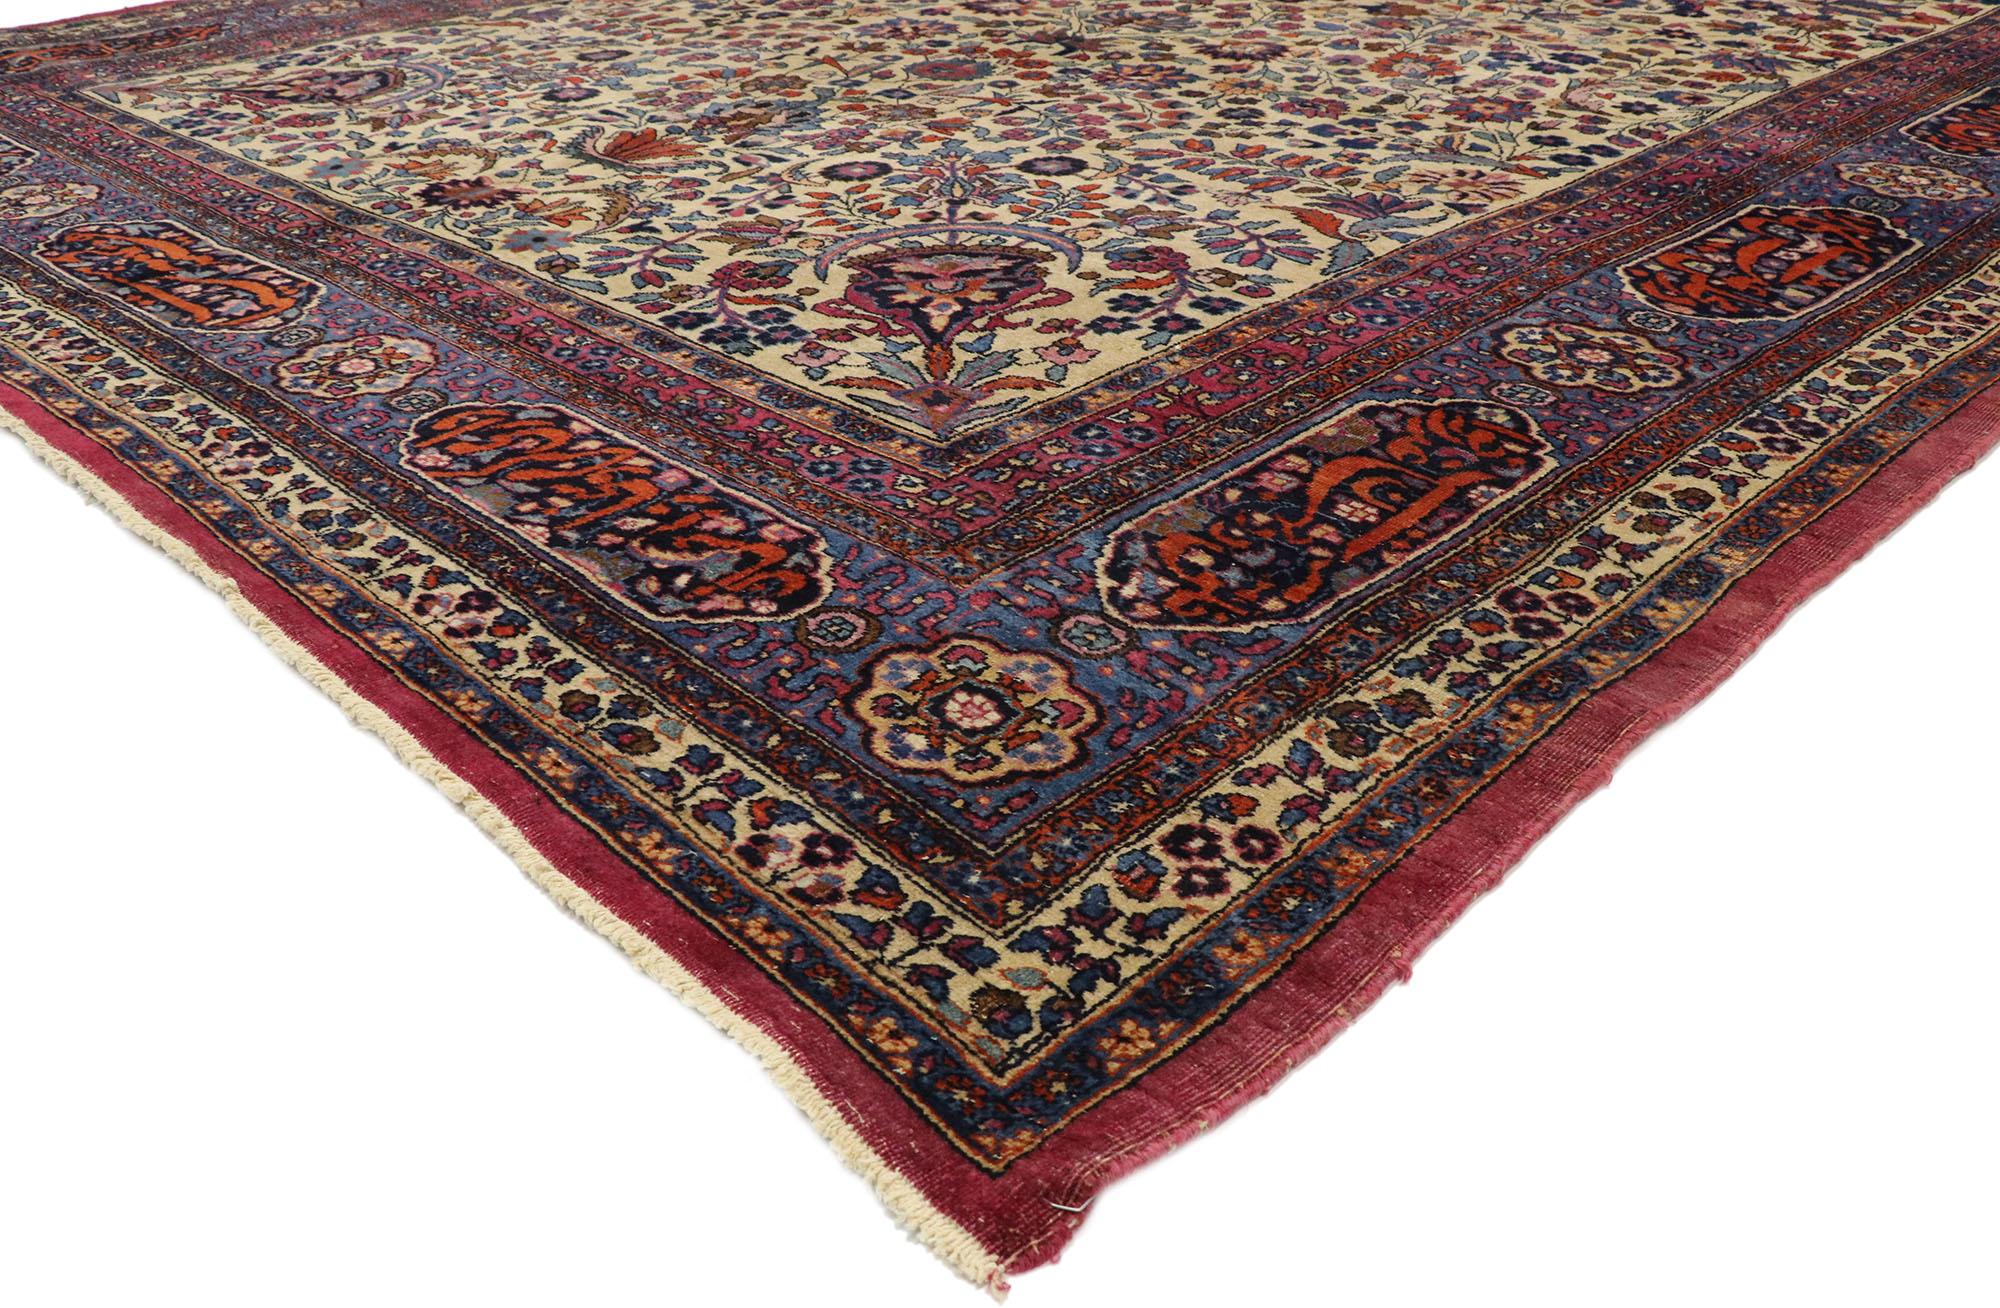 72026 Antique Persian Mashhad Rug with Traditional Style, Persian Palace Size Rug. With a beautiful fusion of rich Venetian colors and Modern Victorian style, this hand-knotted wool antique Persian Mashhad palace rug  is designed to impress. The